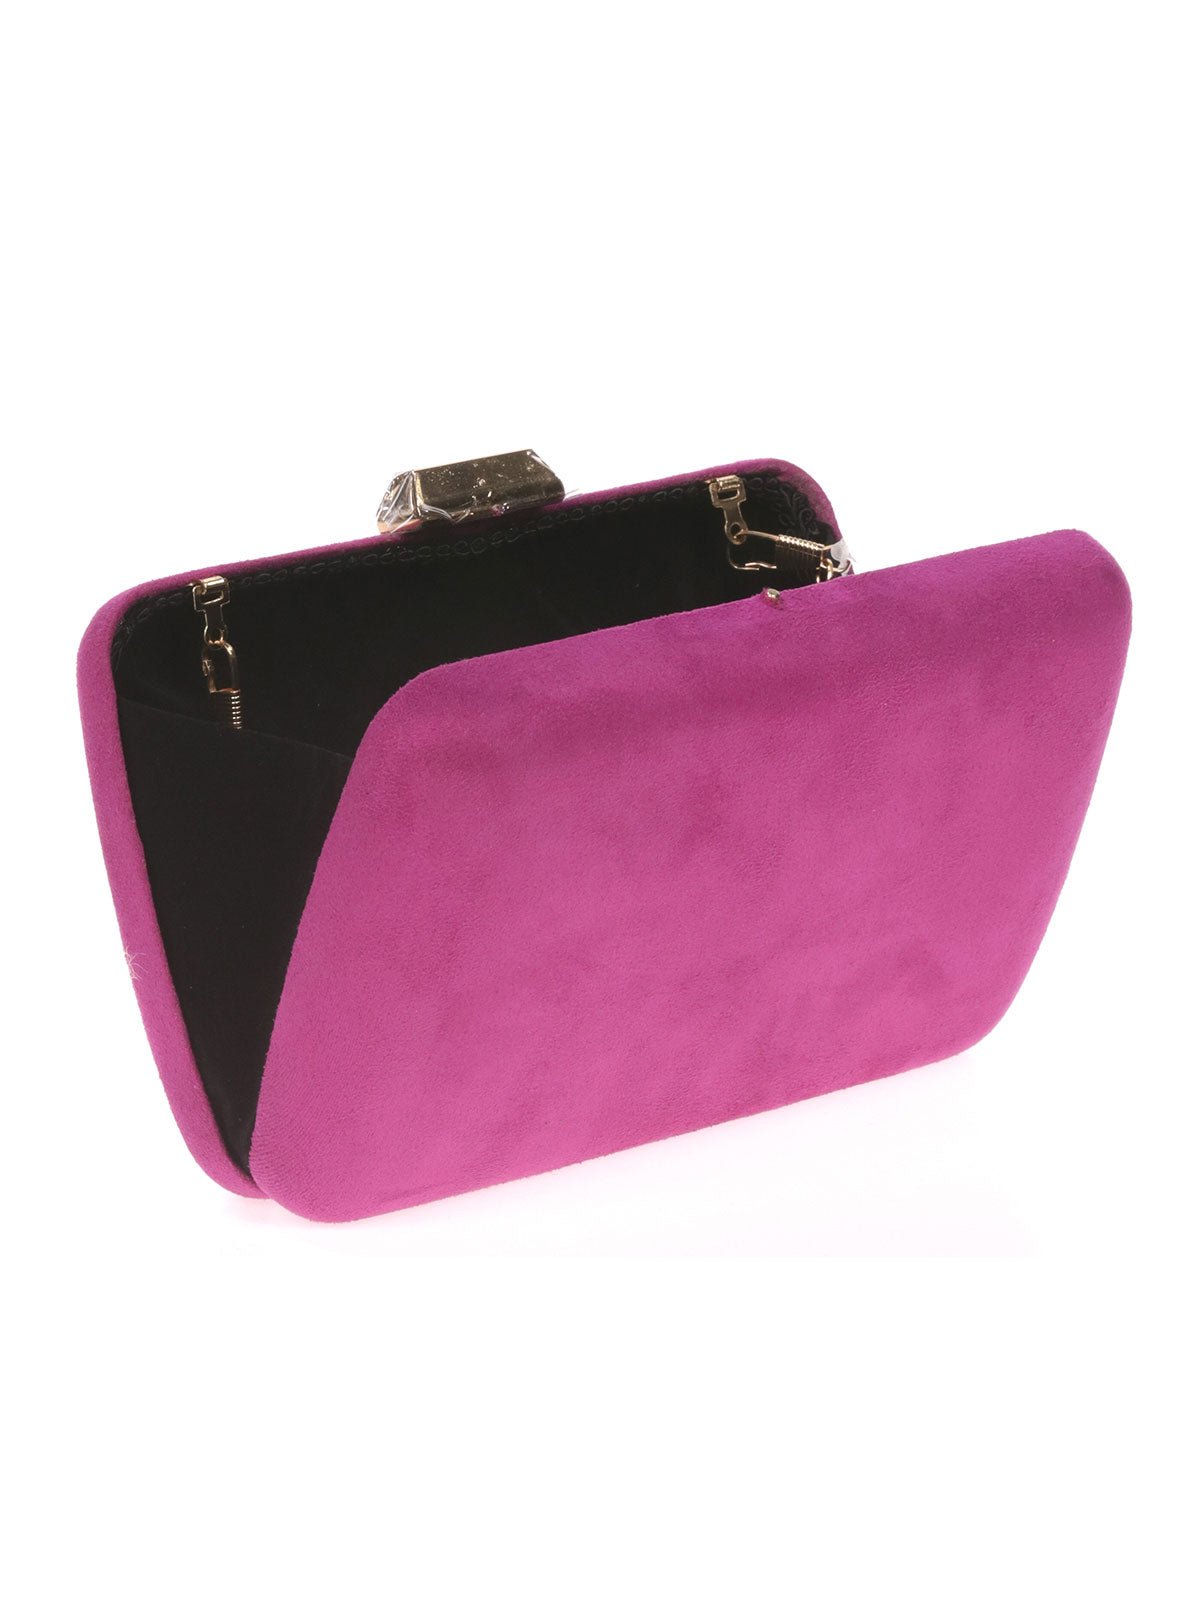 Anabelle Suede Clutch - Raspberry Pink-Bag-AD-#STASH